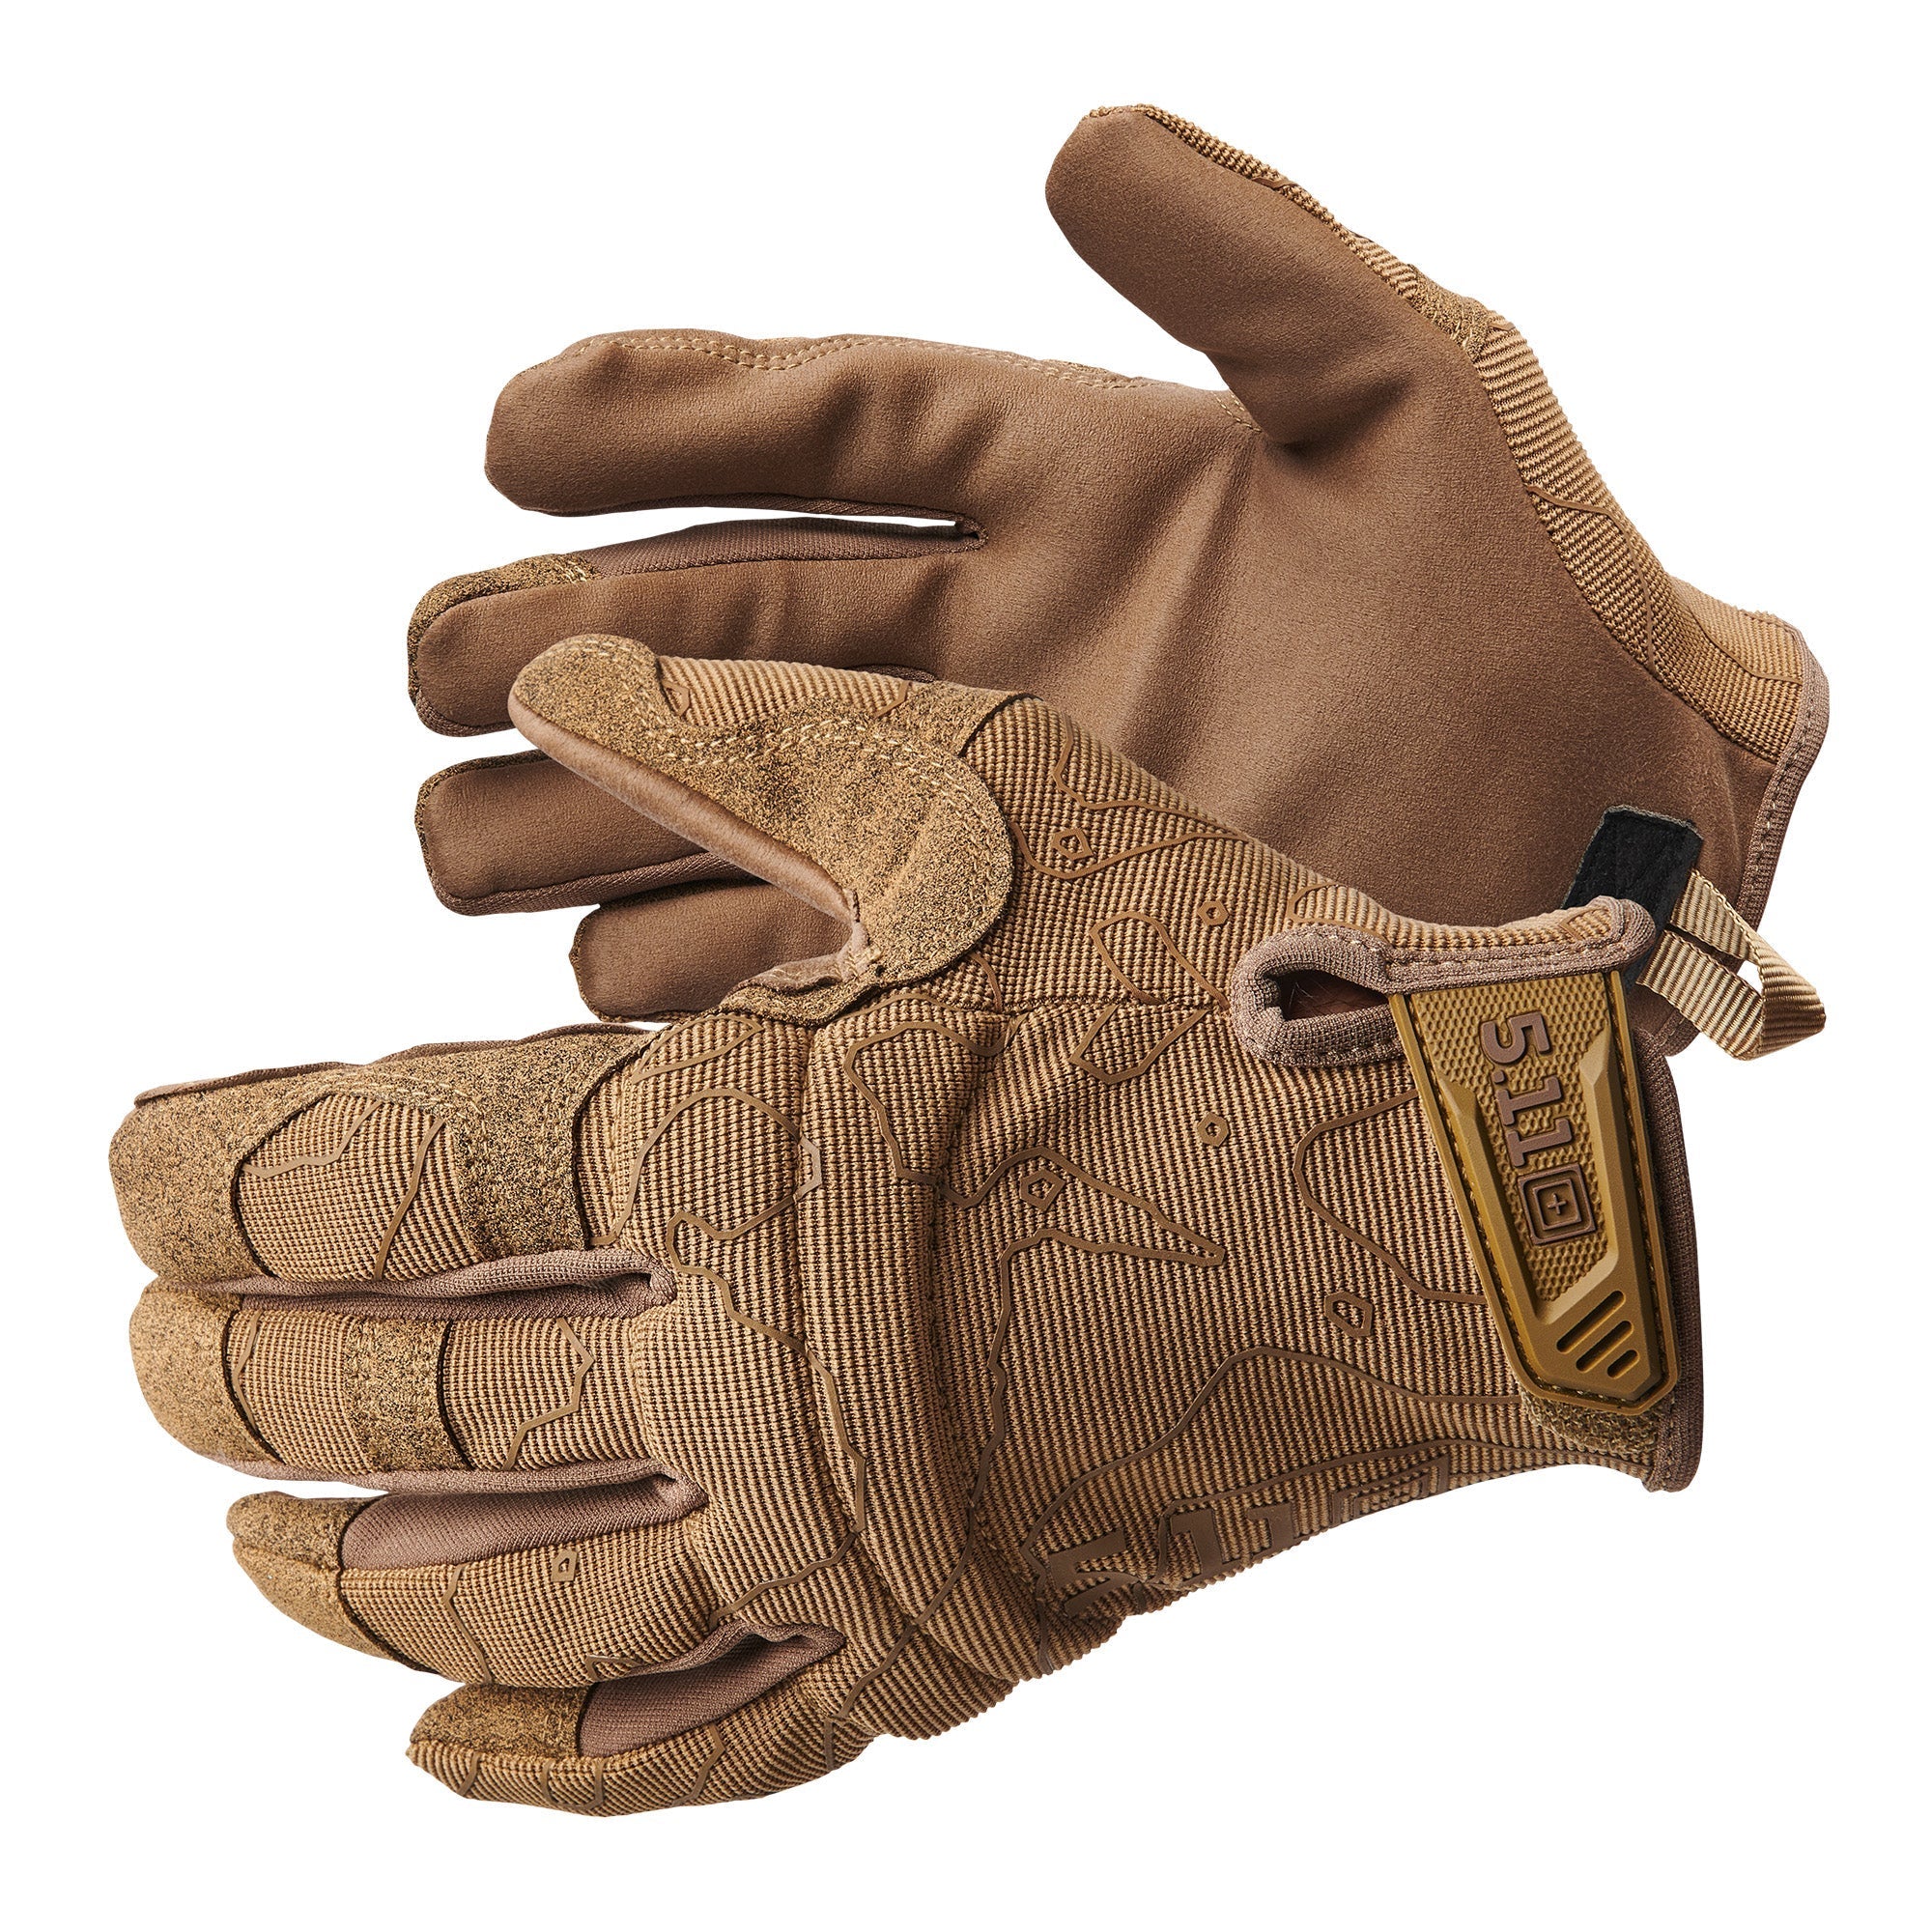 5.11 Tactical High Abrasion 2.0 Glove Gloves 5.11 Tactical Black Small Tactical Gear Supplier Tactical Distributors Australia